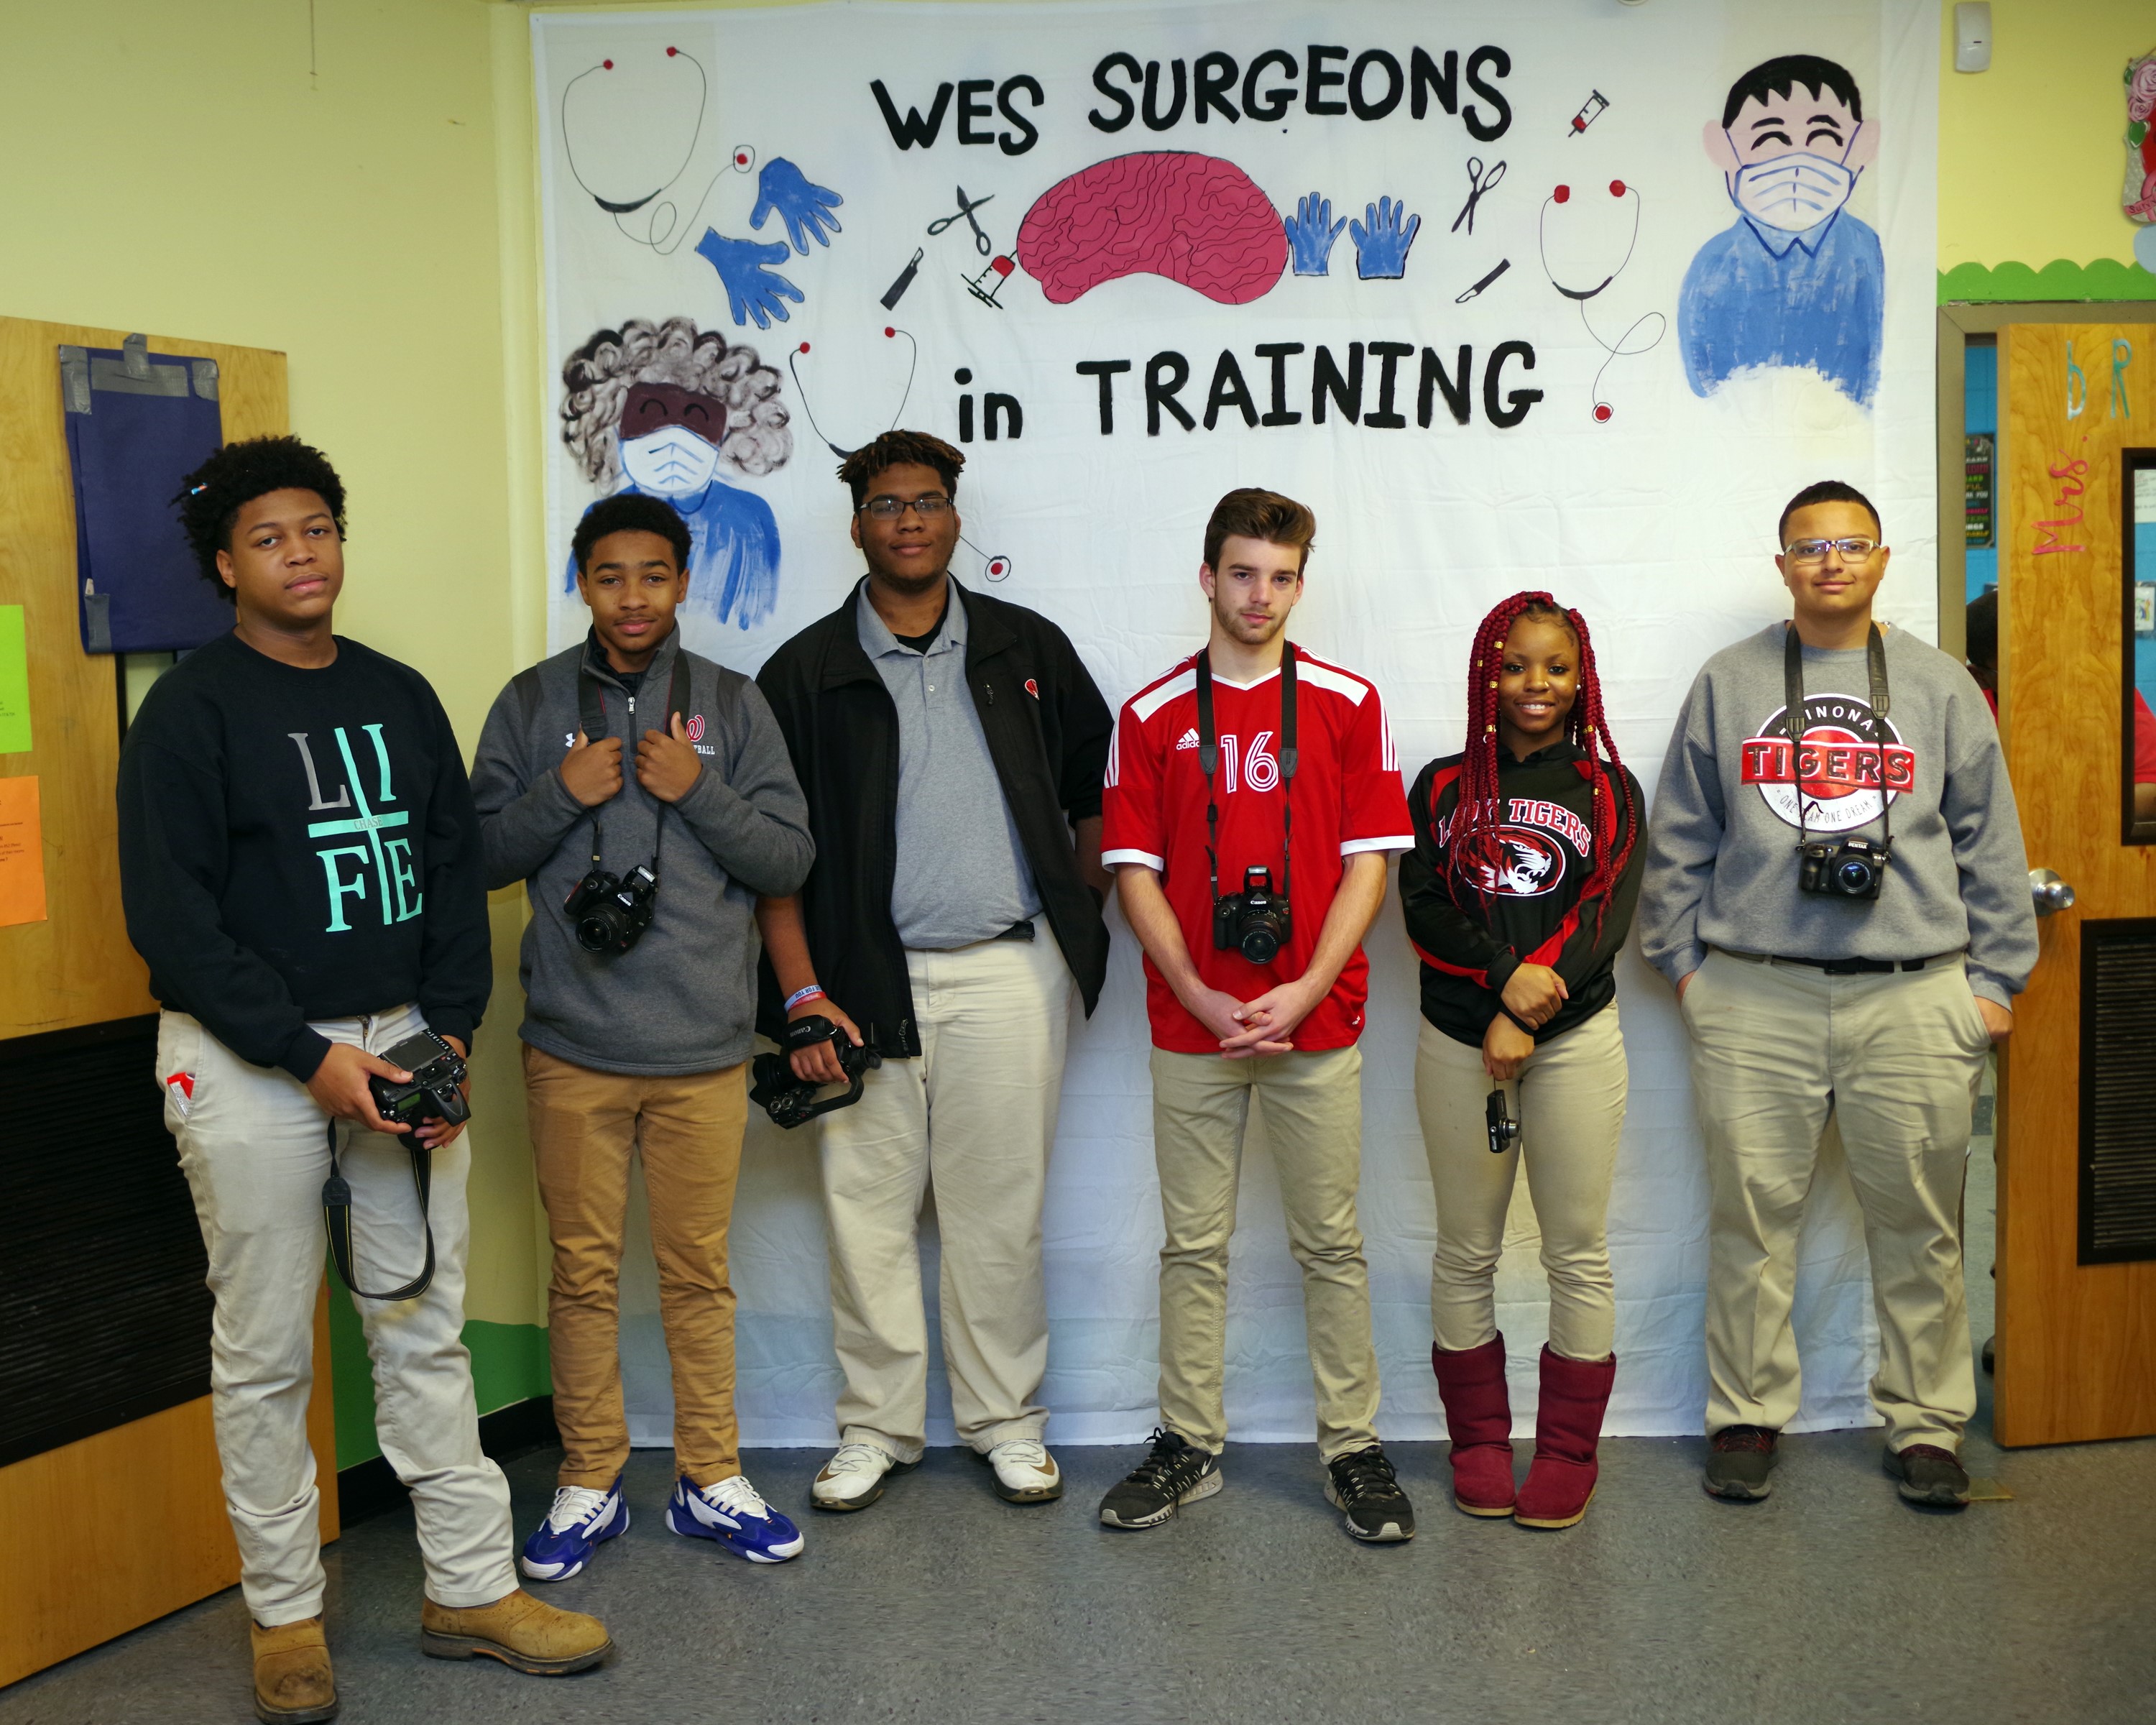 A group of 6 students standing in front of a wall that has Wes Surgeons in training written behind them.